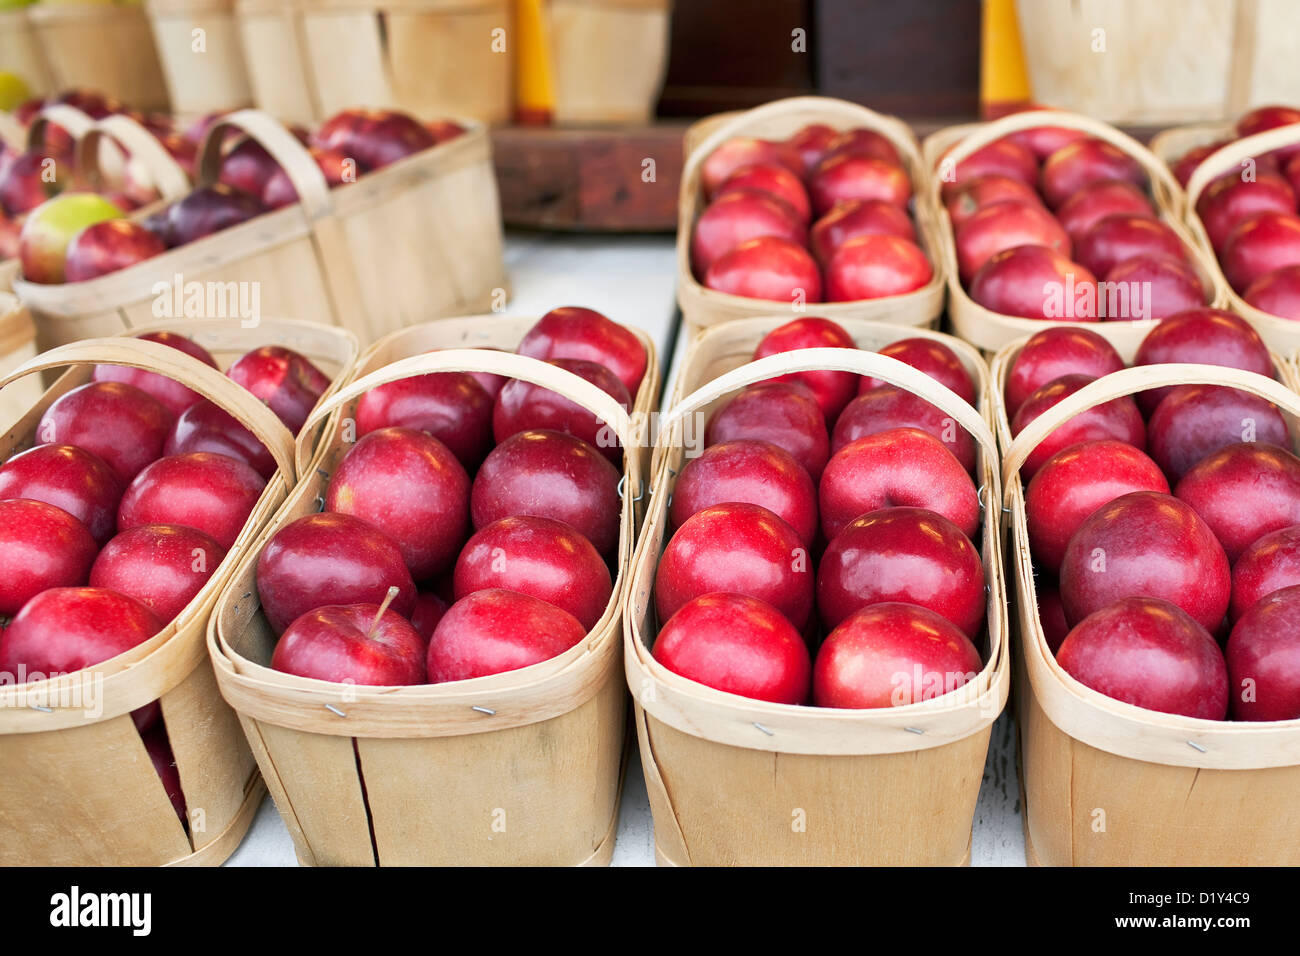 Apples in baskets at a farmers market, Eastern Townships, Quebec, Canada Stock Photo